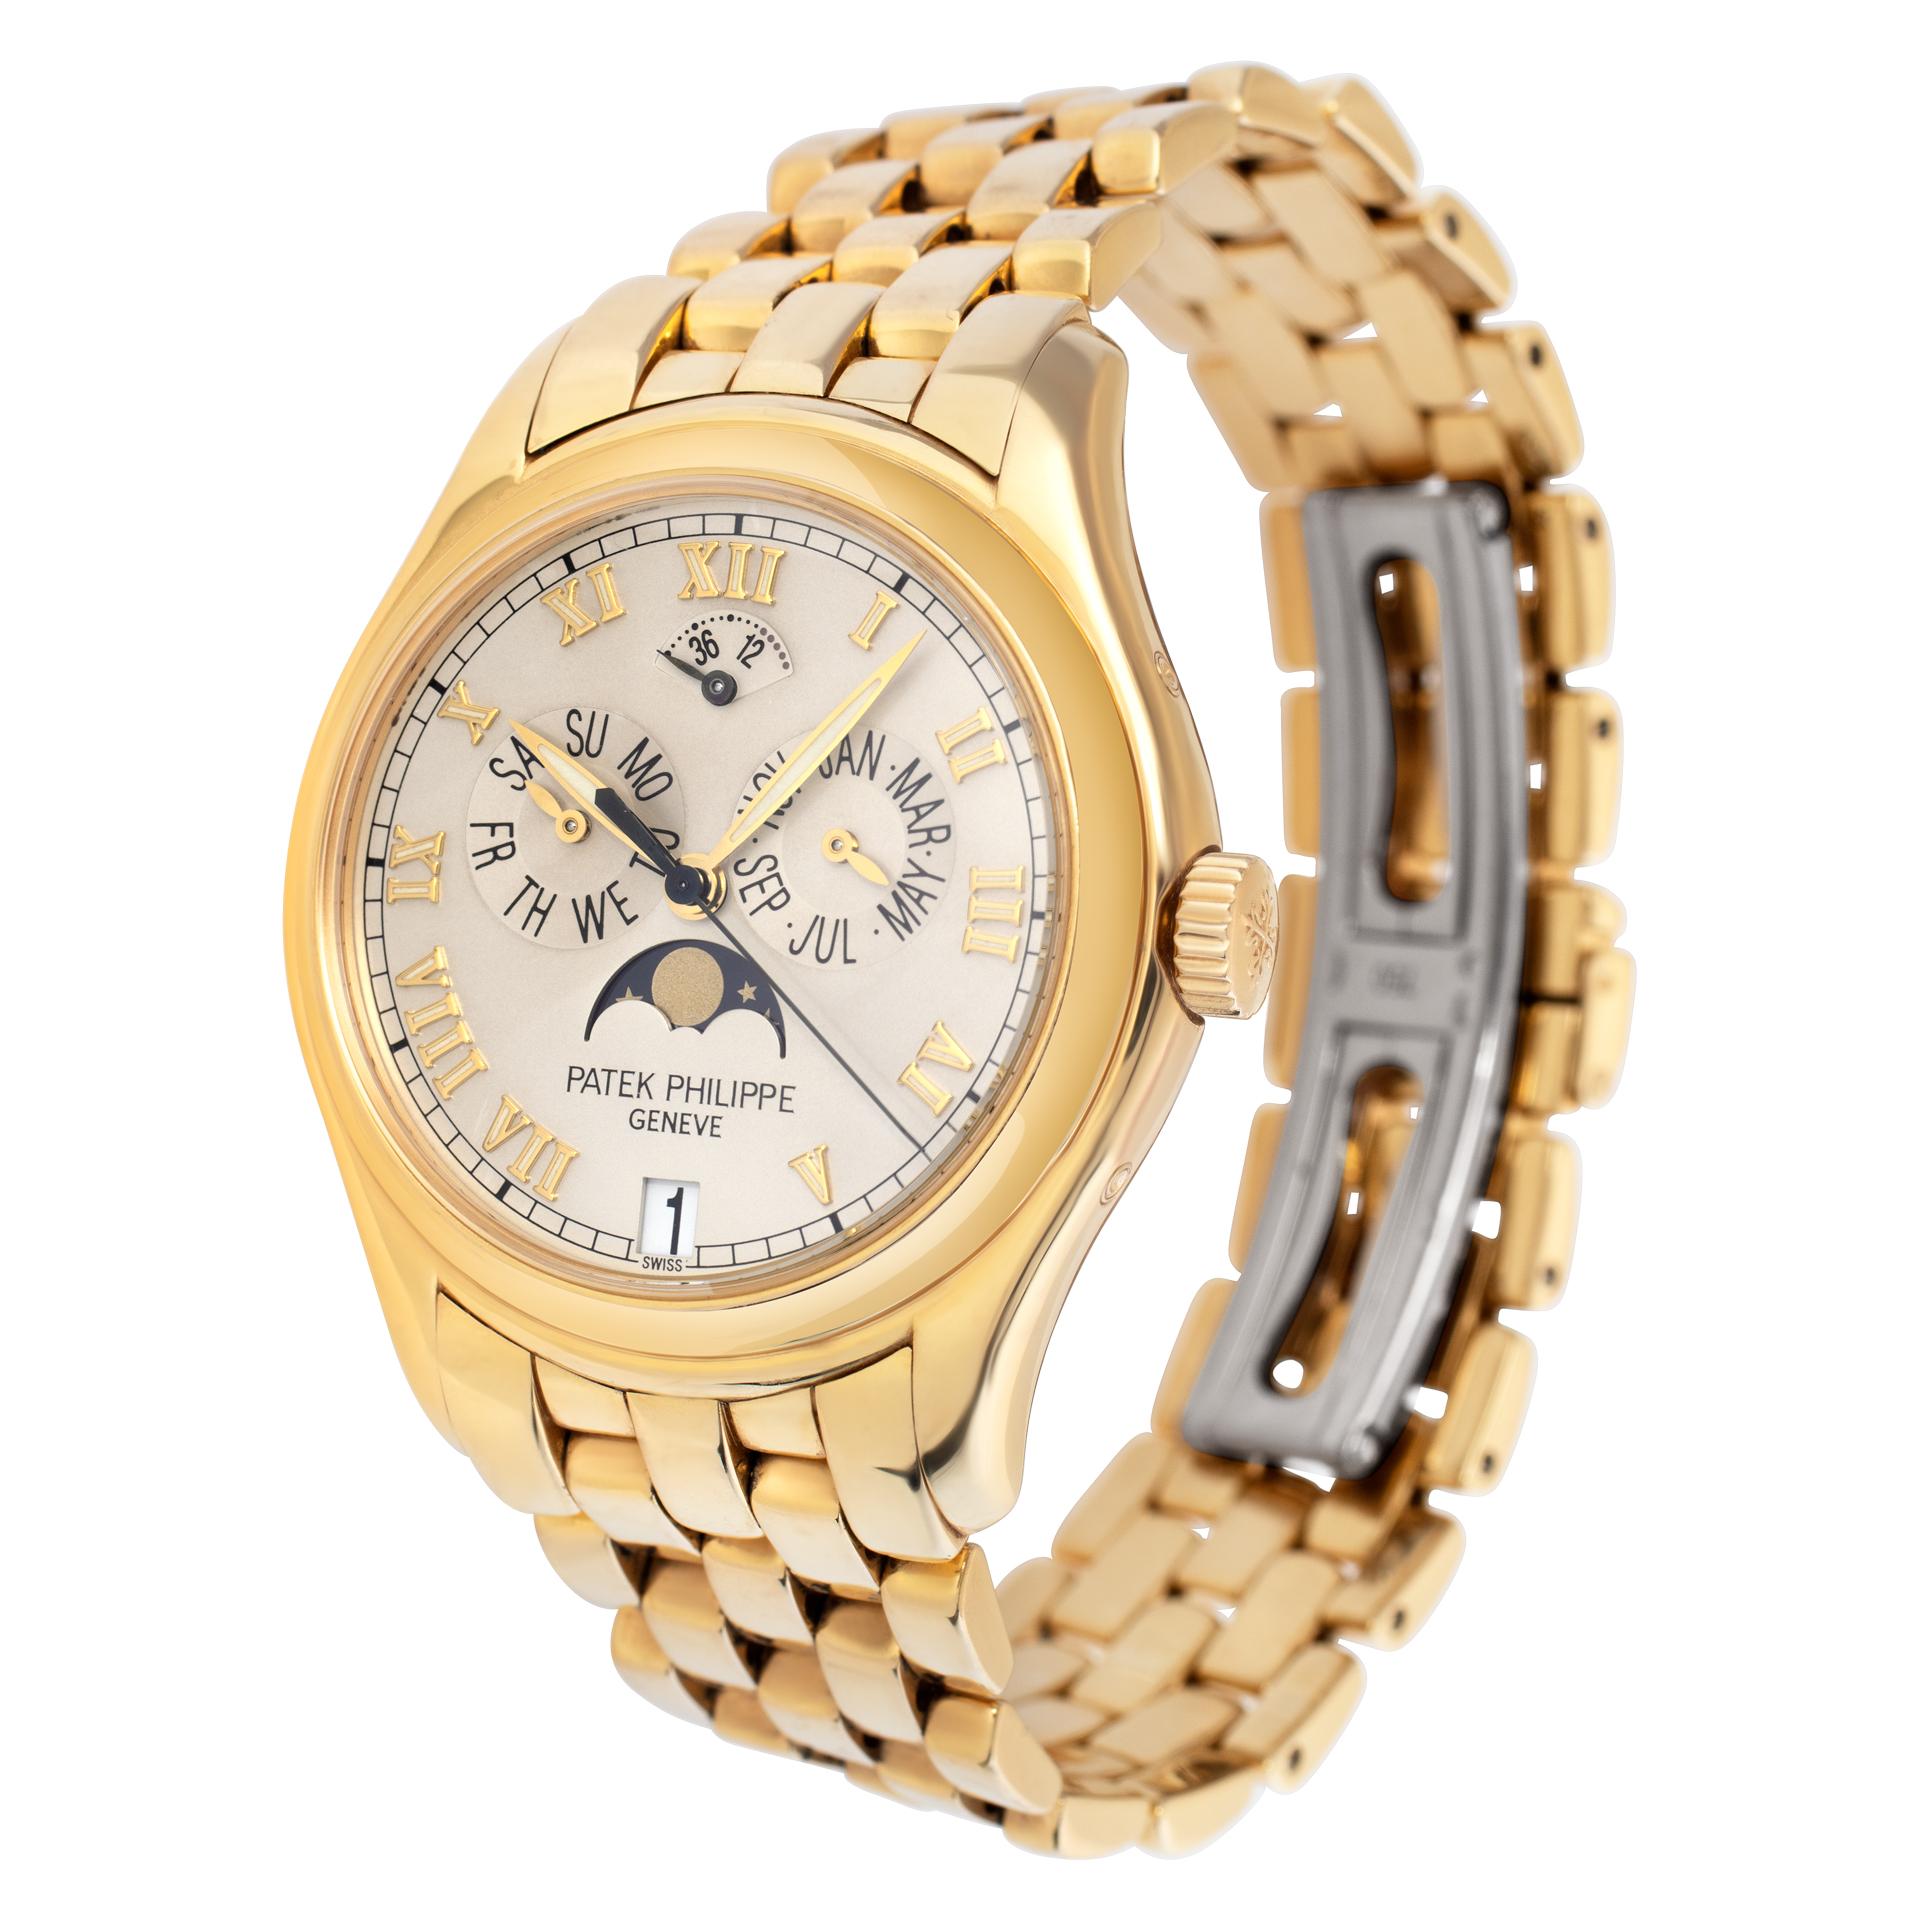 Patek Philippe Annual Calendar in 18k yellow gold. Auto w/ sweep seconds, date, day, month, moonphase and power reserve. 36 mm case size. With box and papers. Ref 5036/1. Fine Pre-owned Patek Philippe Watch. Certified preowned Dress Patek Philippe